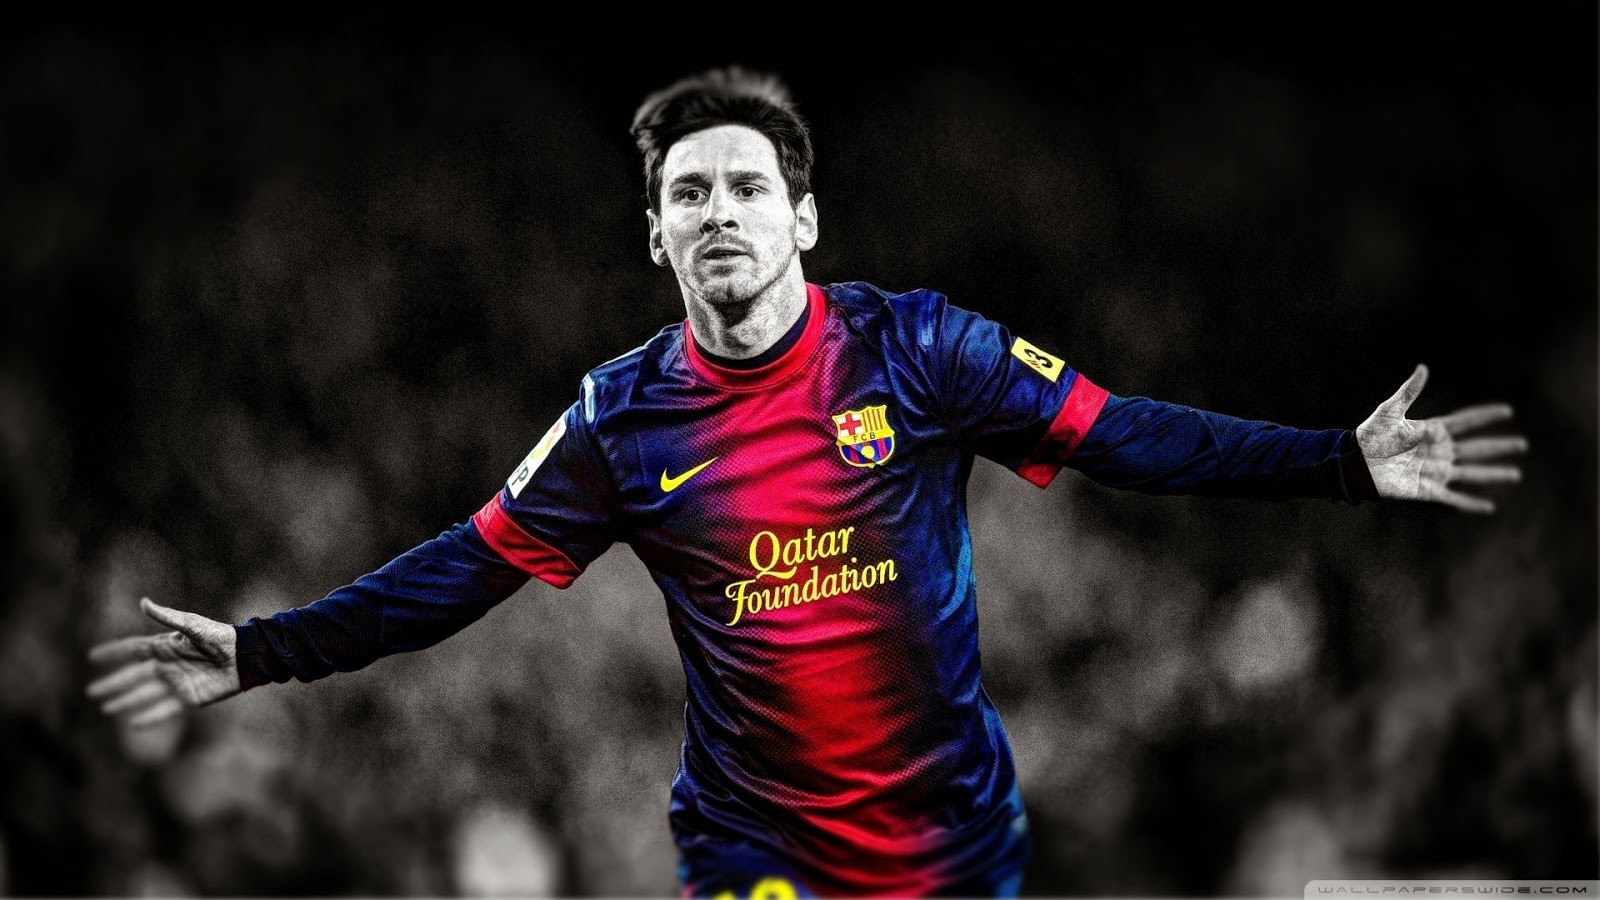 lionel messi wallpaper 2014 2015 FULL HD High Definition 1600x900